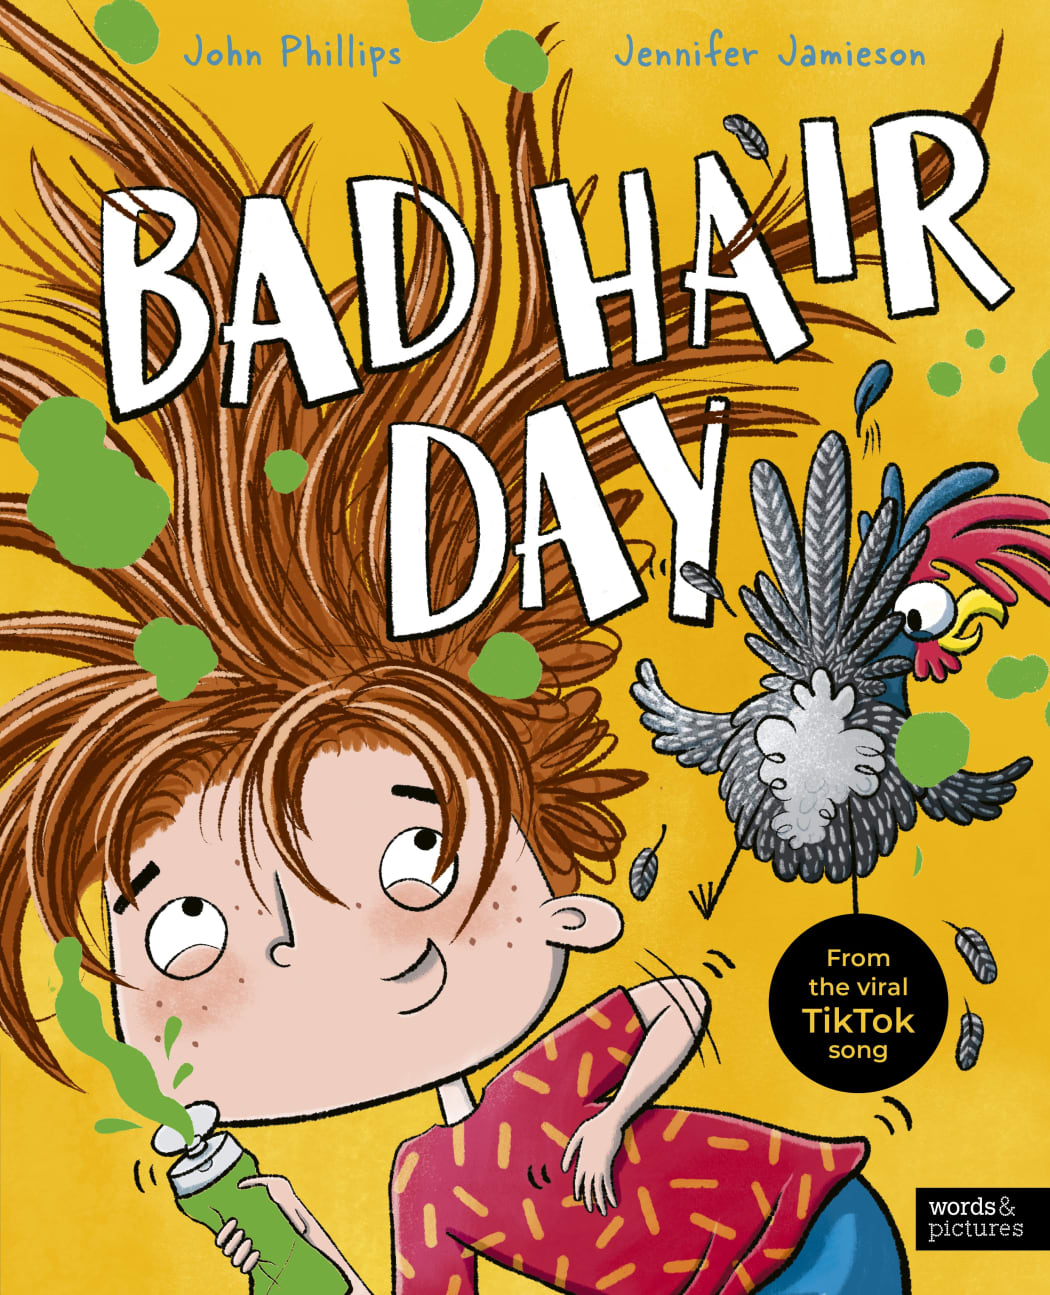 Bad Hair Day book cover